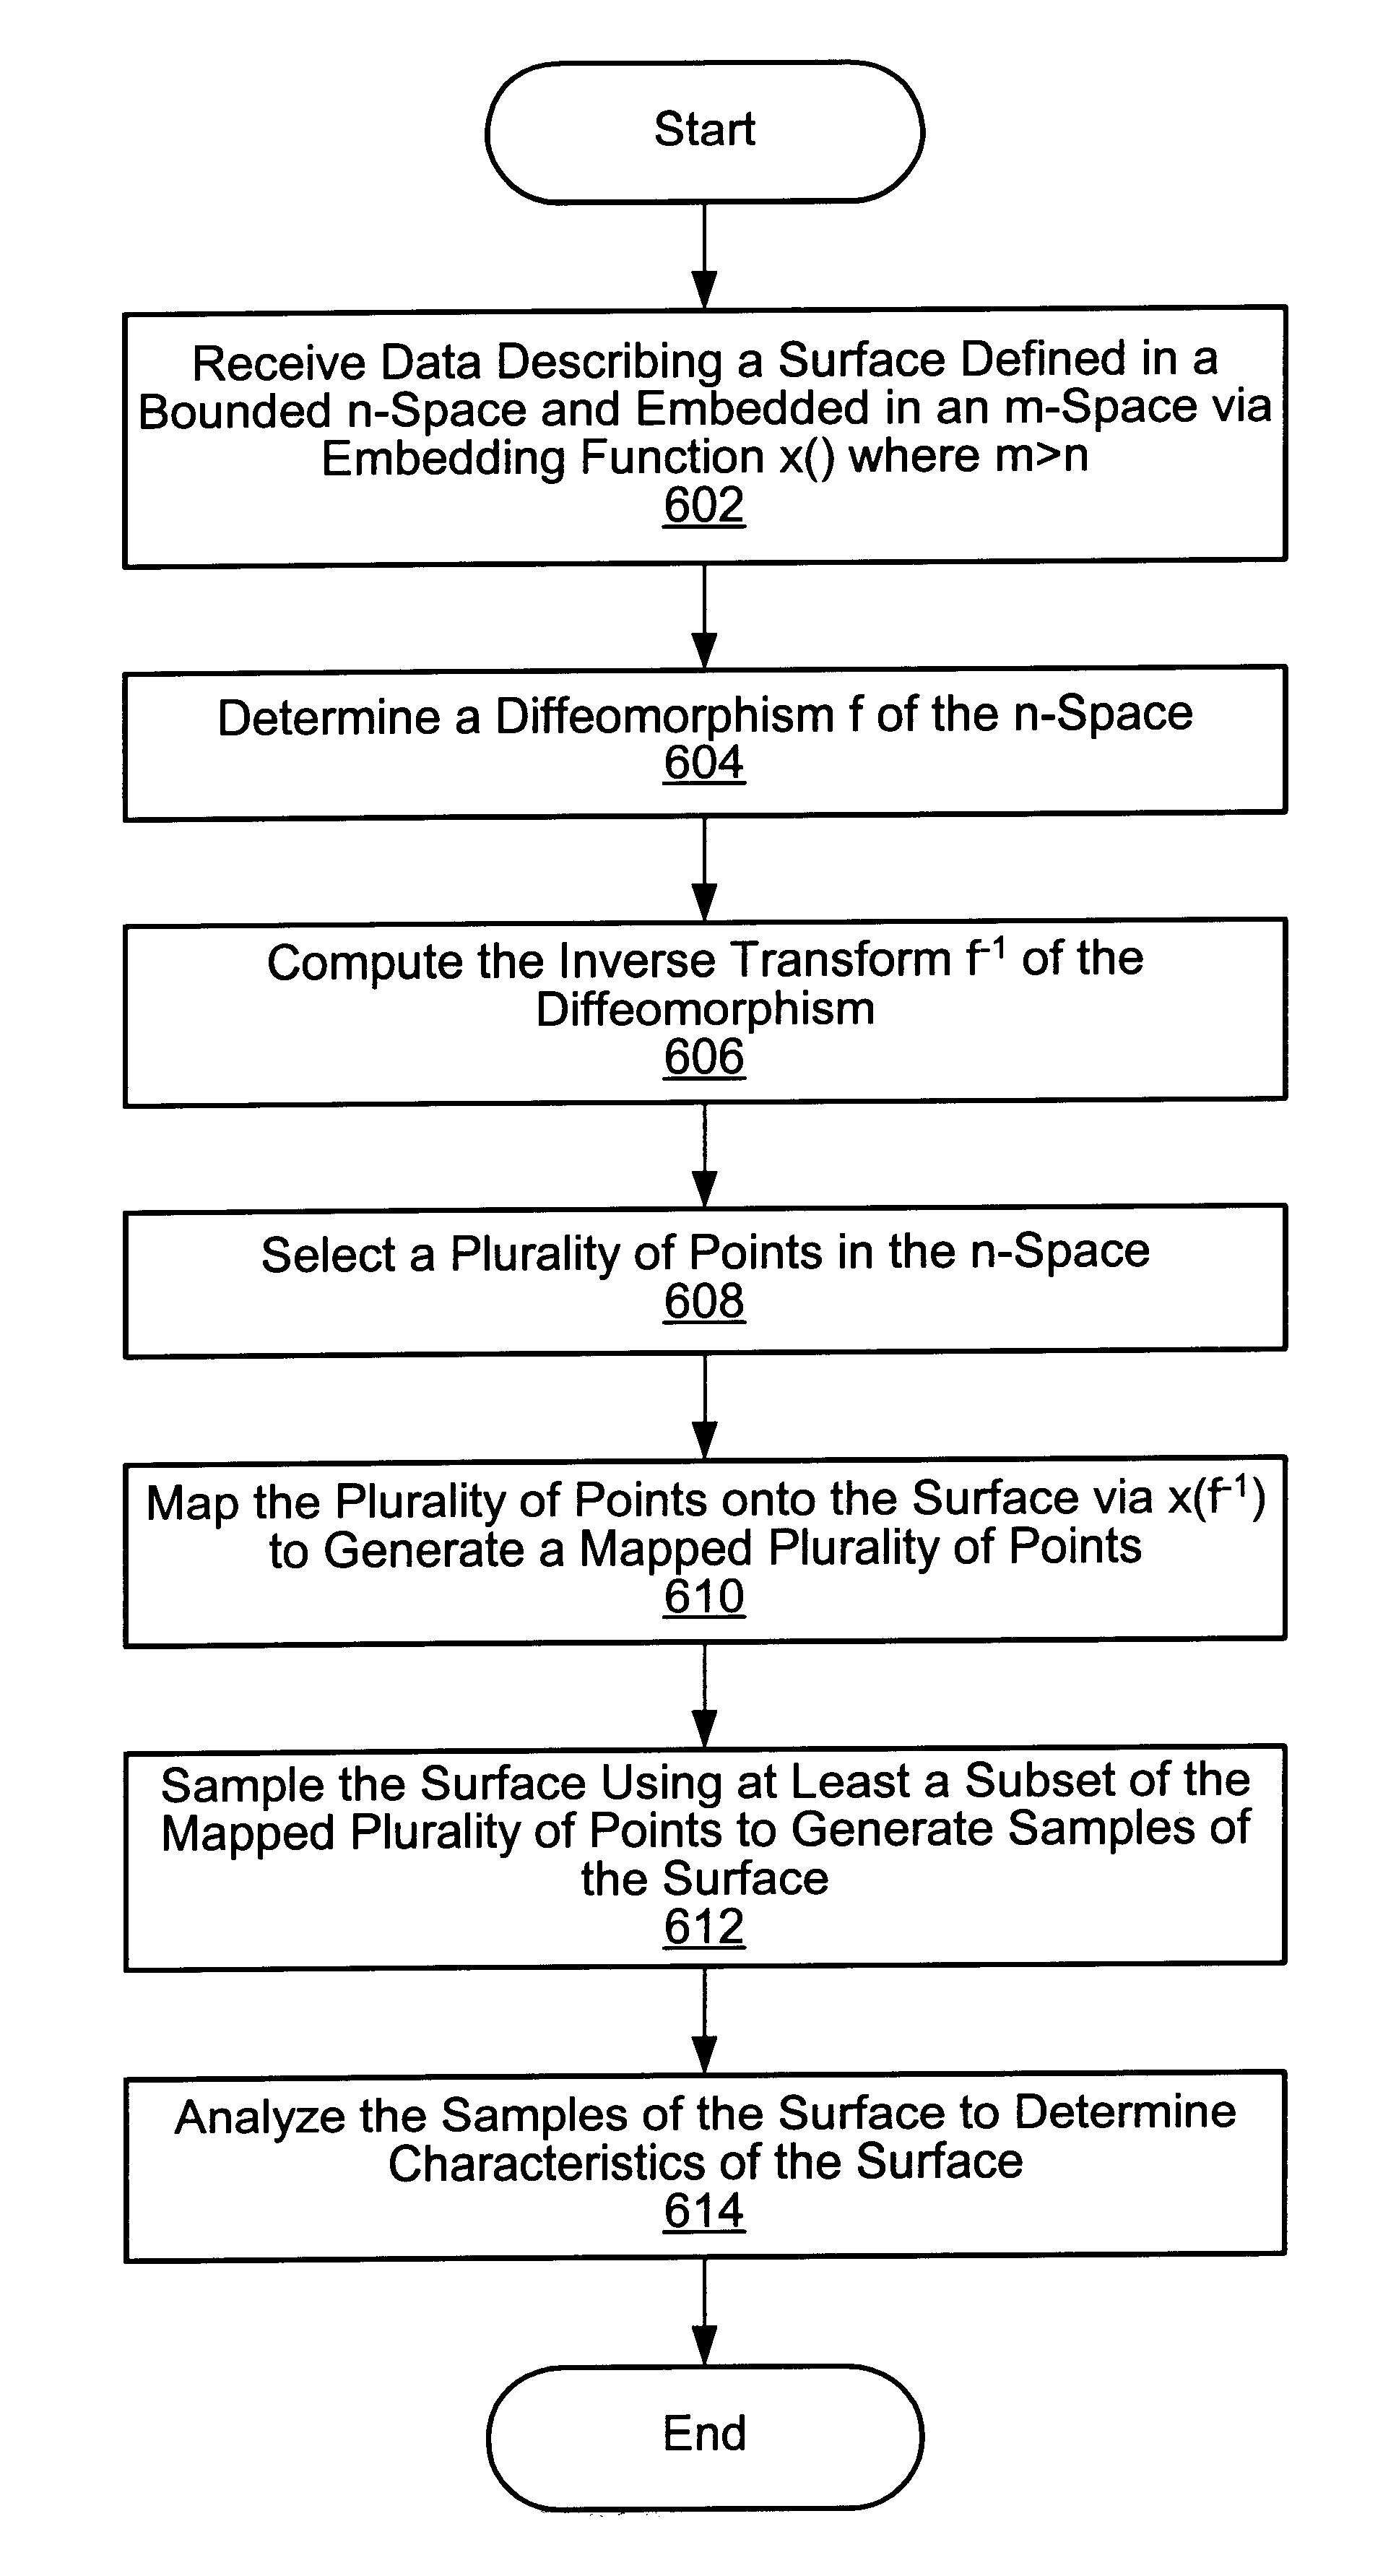 System and method for analyzing a surface by mapping sample points onto the surface and sampling the surface at the mapped points